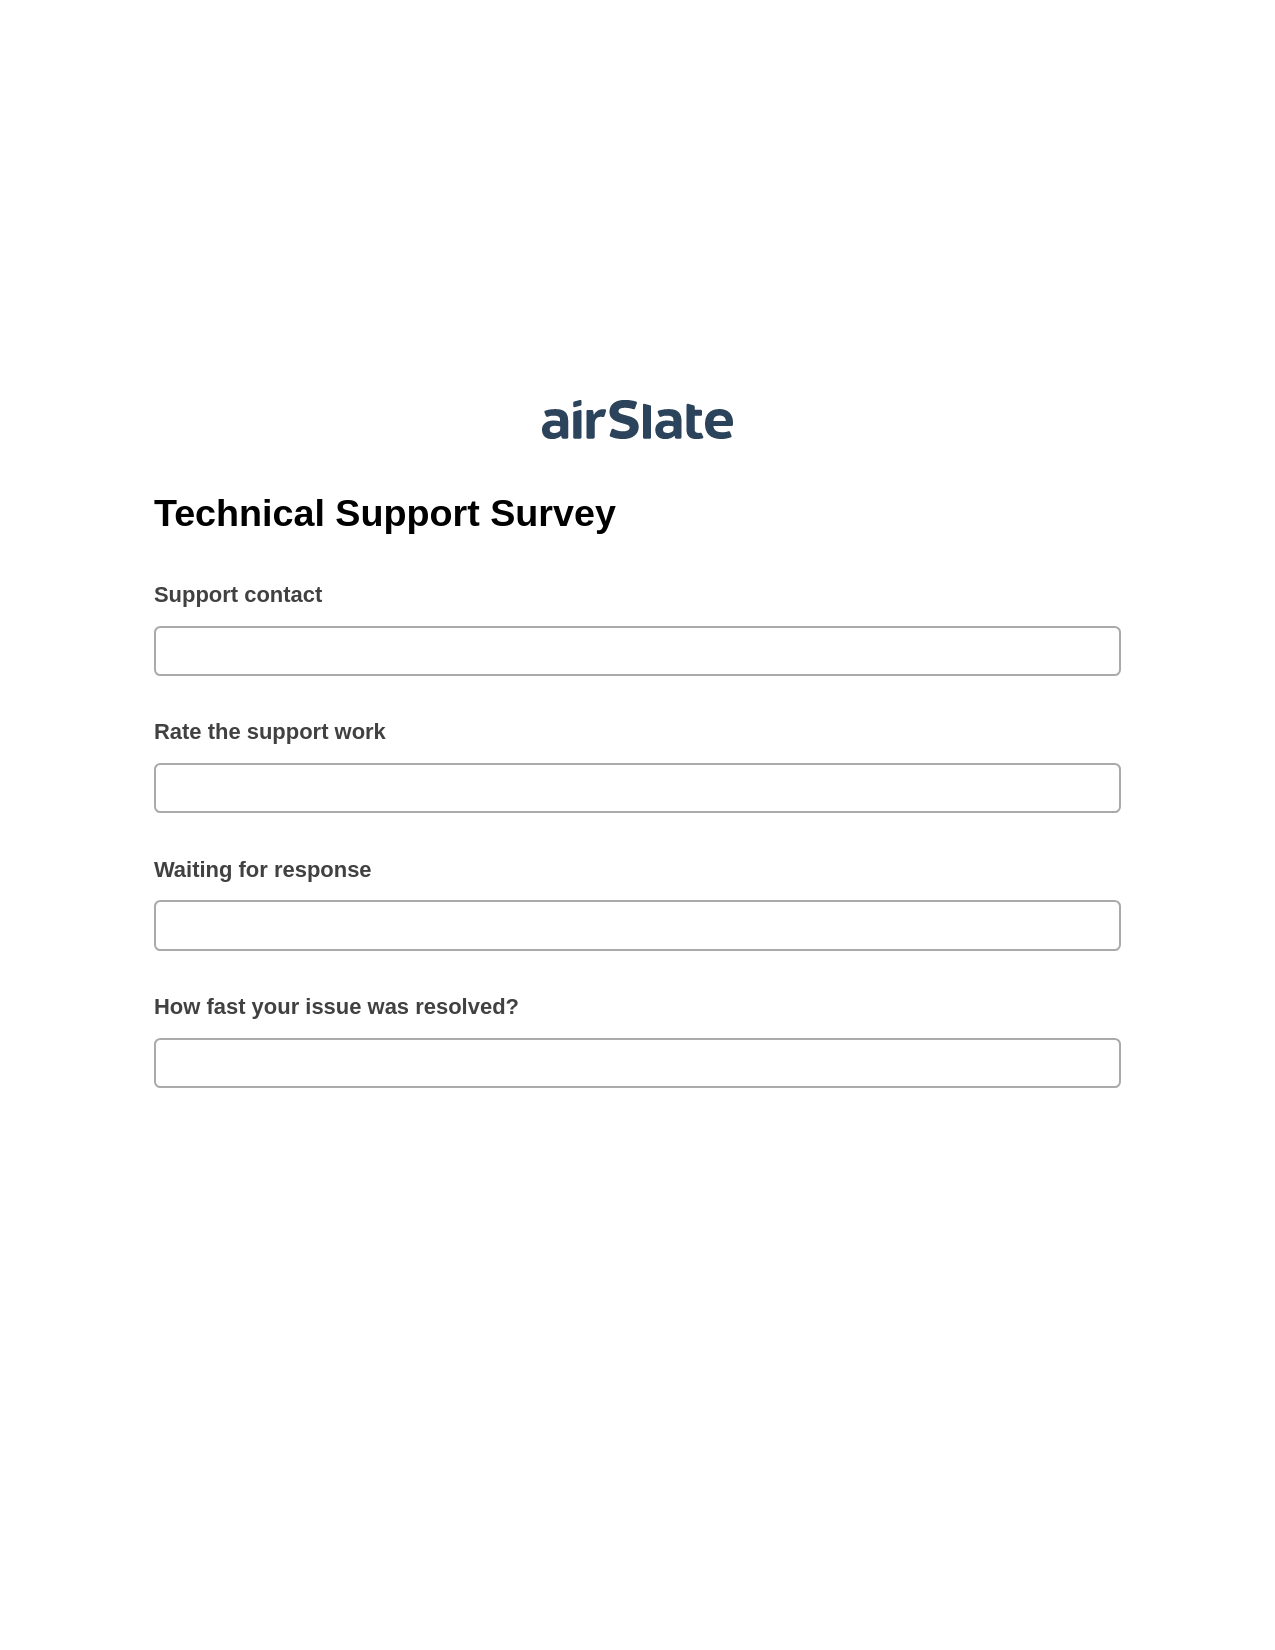 Technical Support Survey Pre-fill from Salesforce Records with SOQL Bot, Custom Field's Value Bot, Export to WebMerge Bot